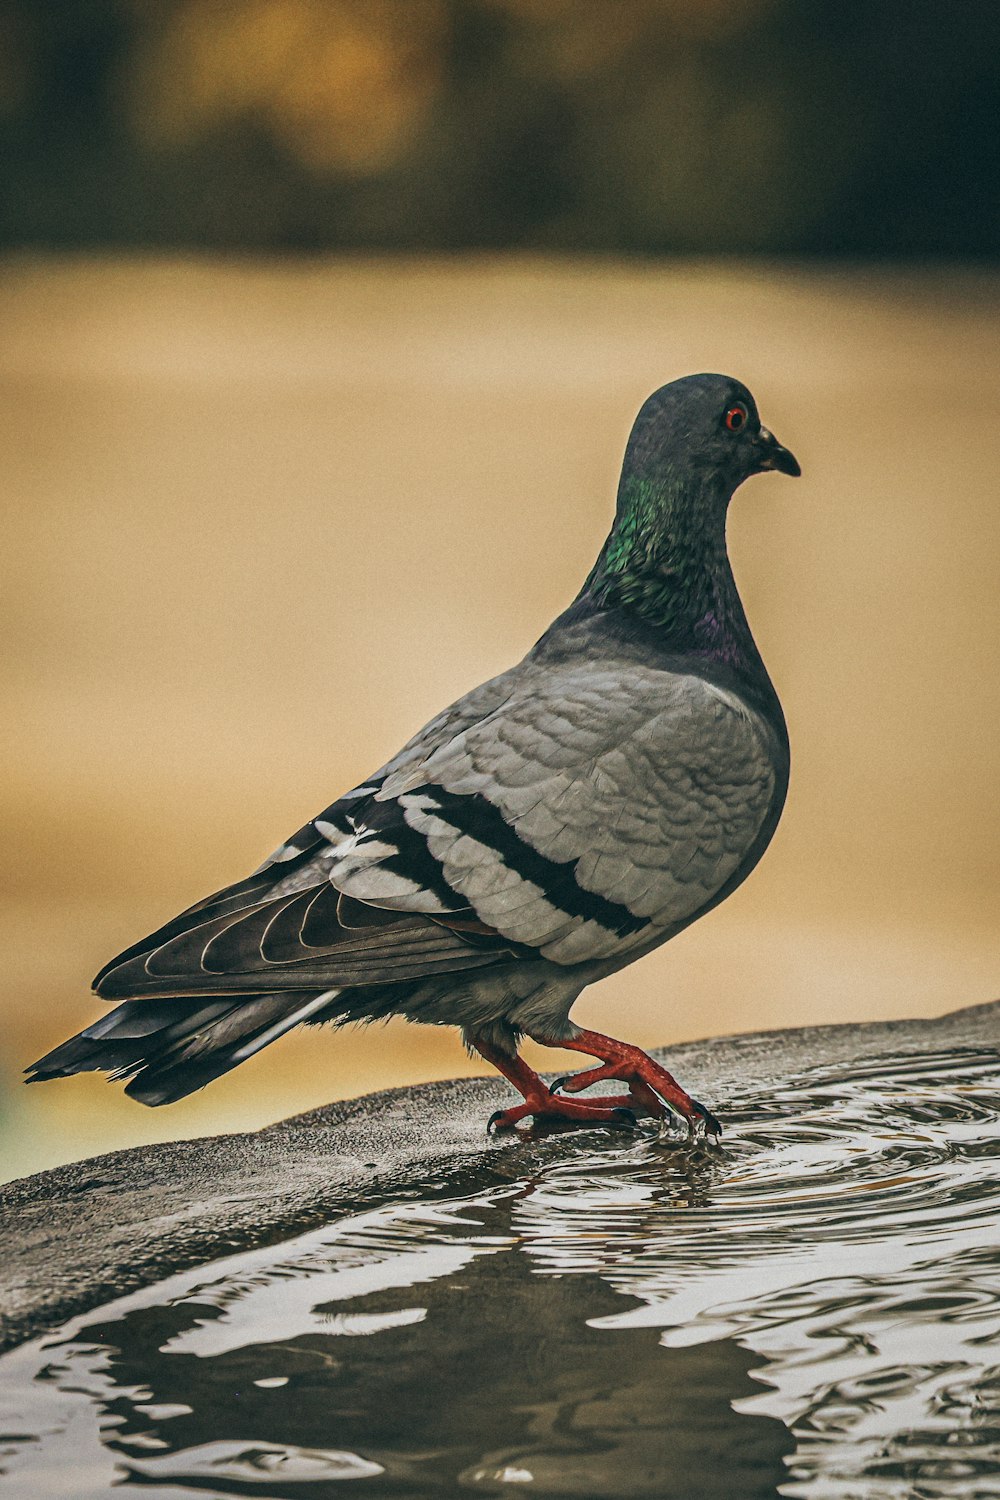 a pigeon standing on a wet surface